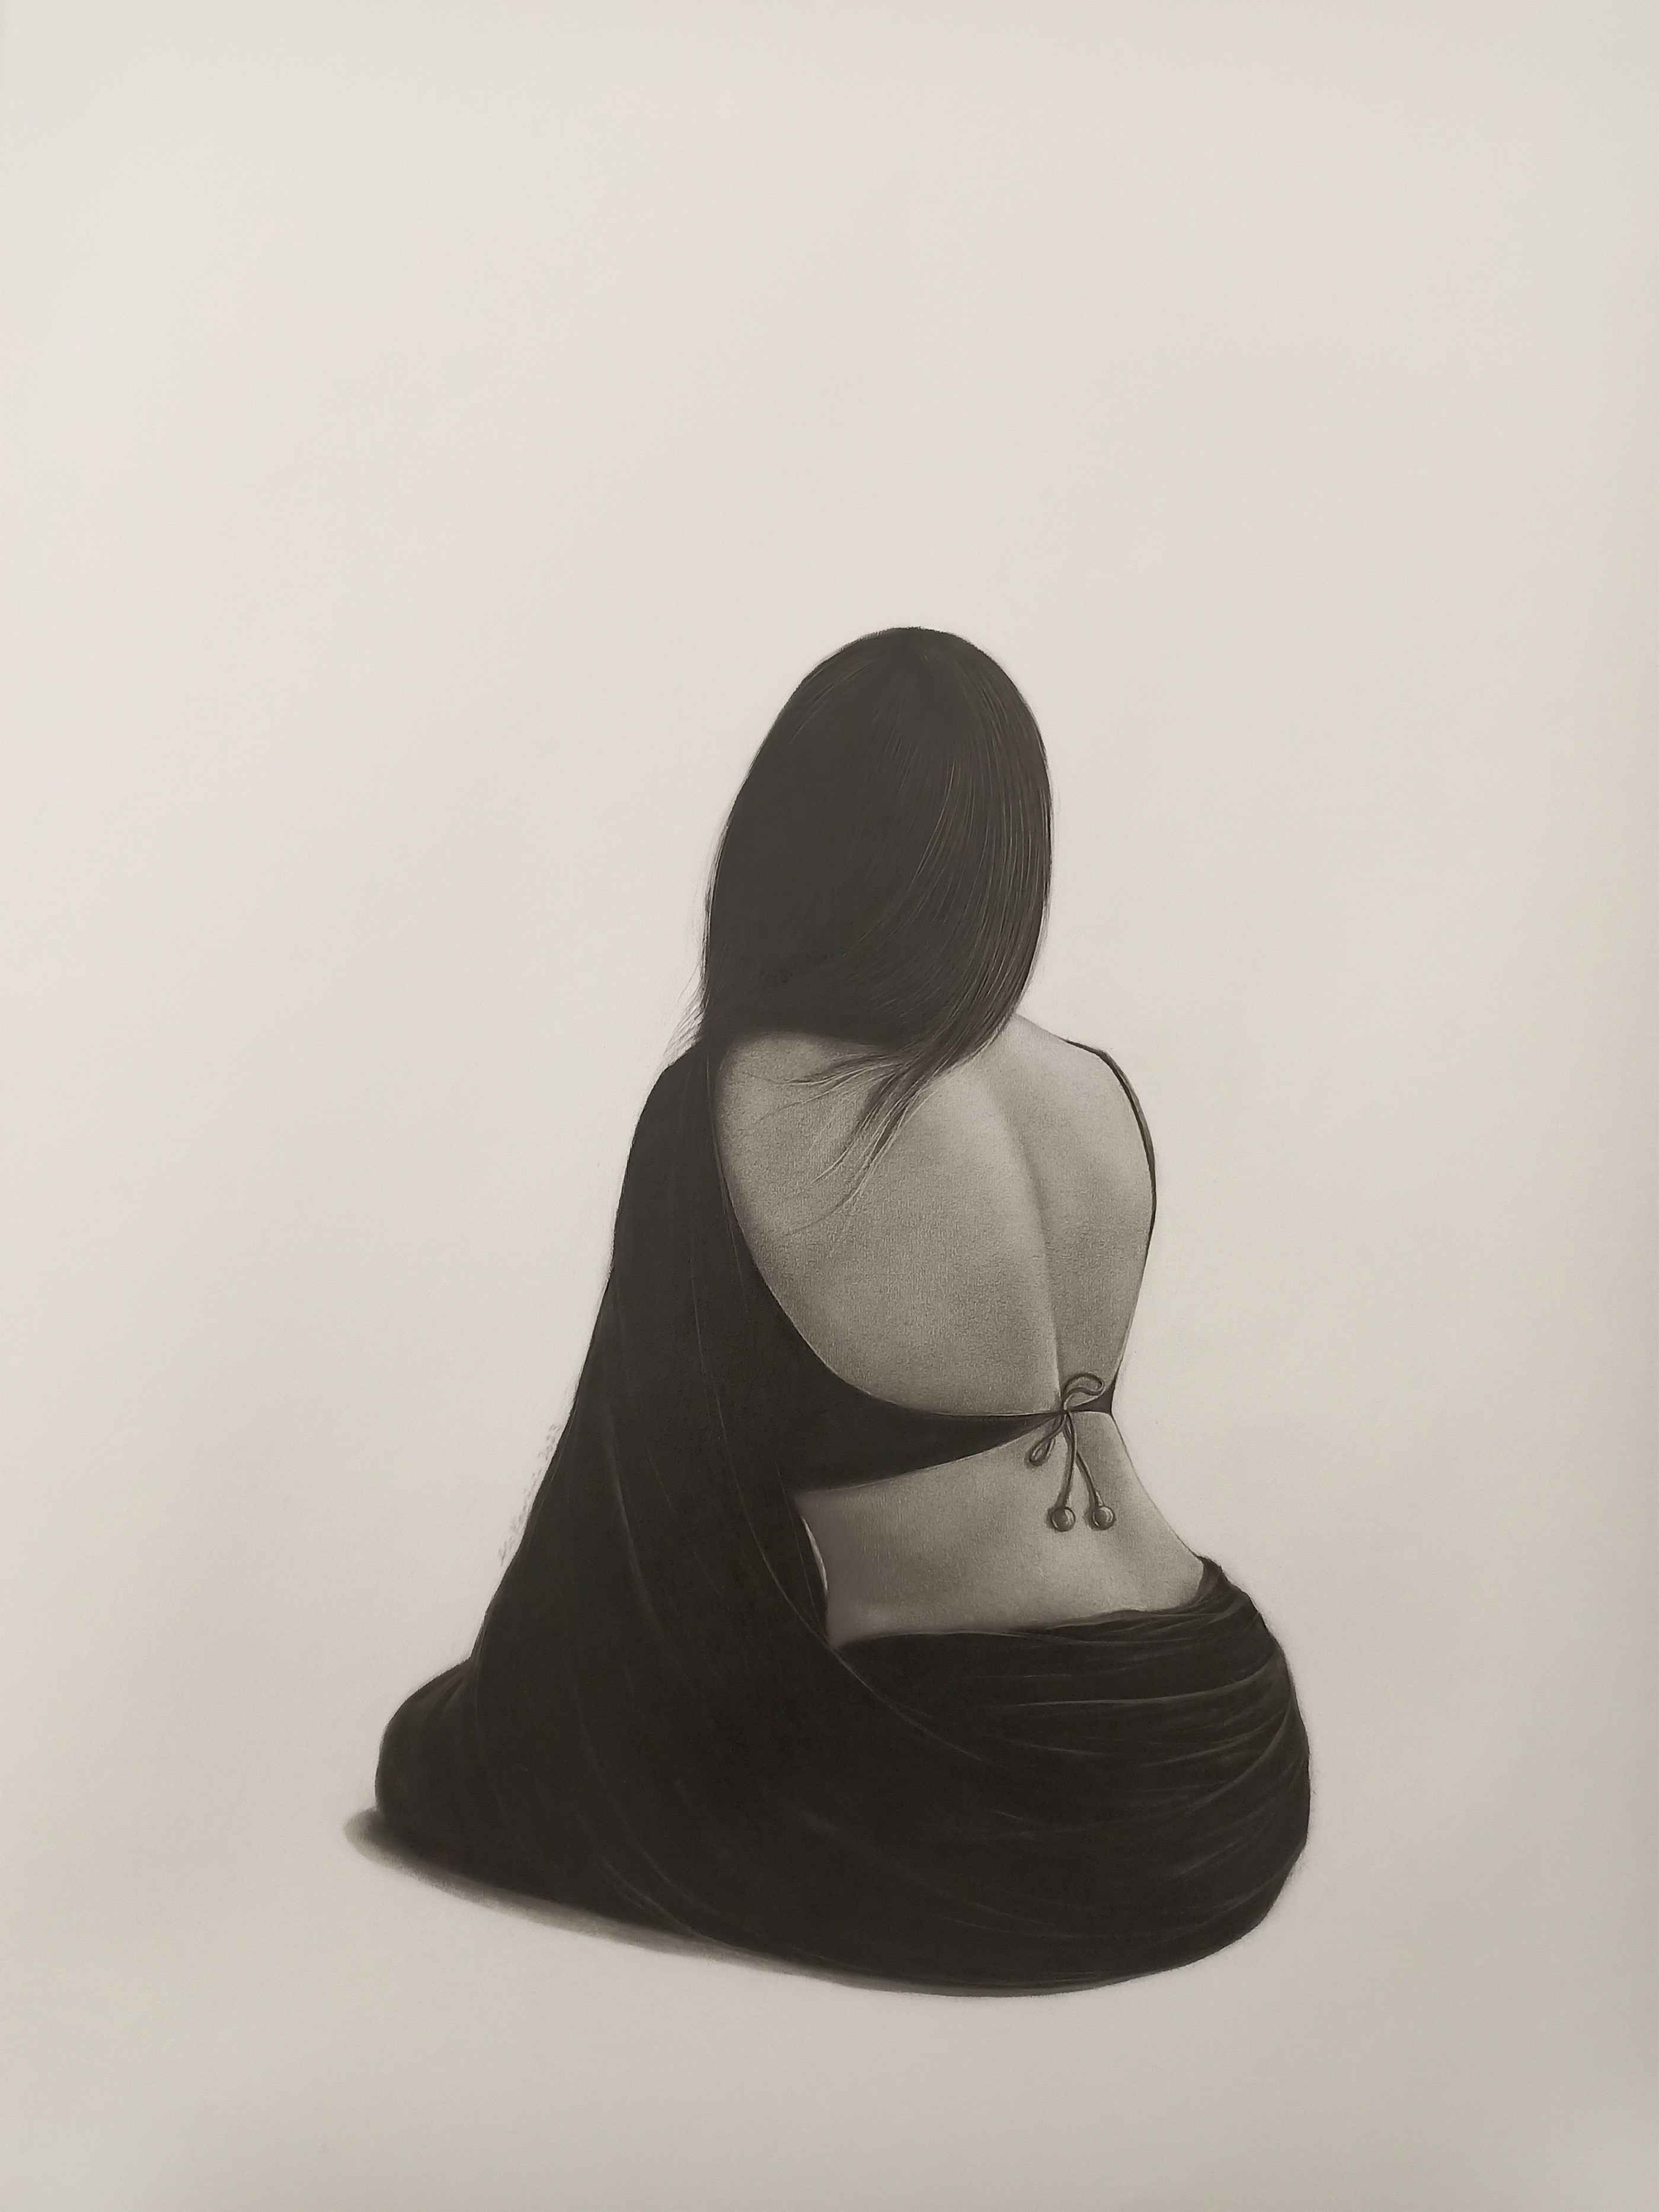 Title: UNTITLED 03<br> Medium: Graphite andCharcoal on paper<br> Size: 43x30 inches